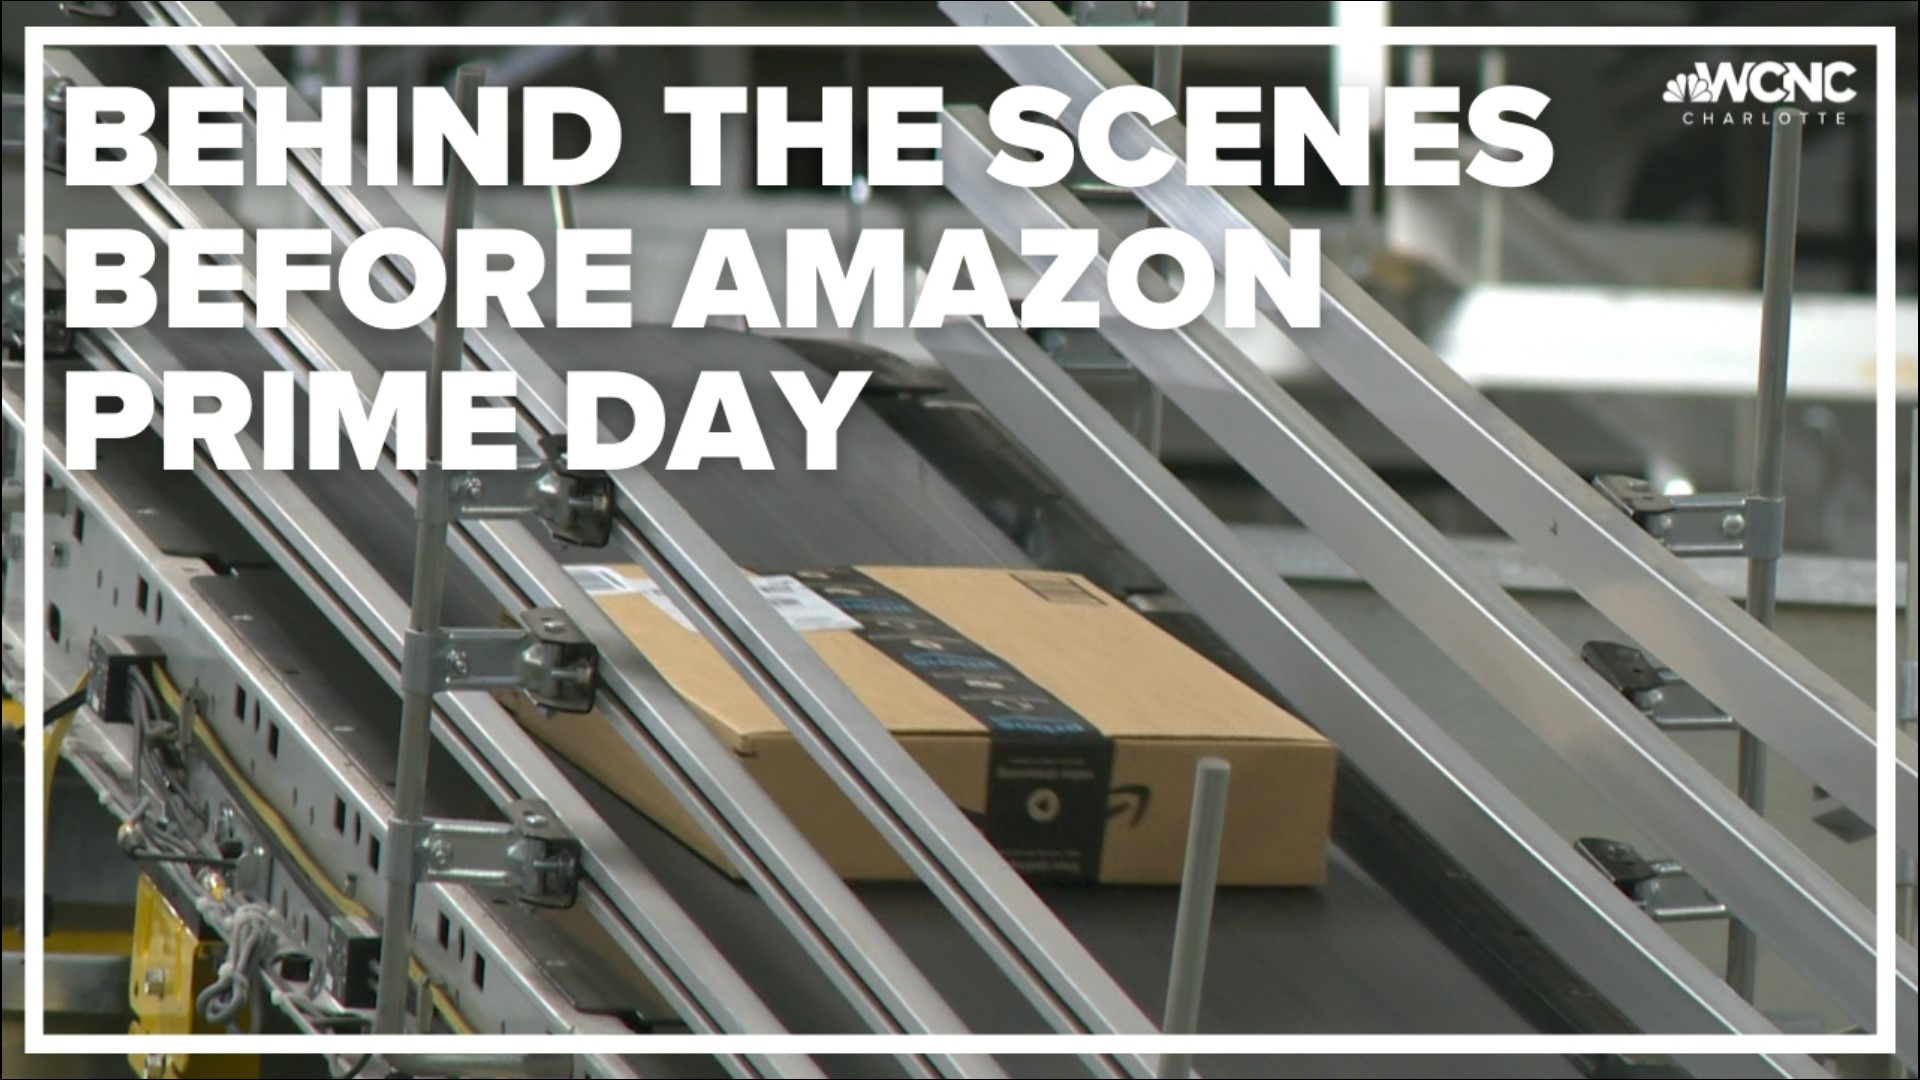 WCNC Charlotte's Briana Harper got a behind the scenes look at the process to buy, pack and deliver at Amazon